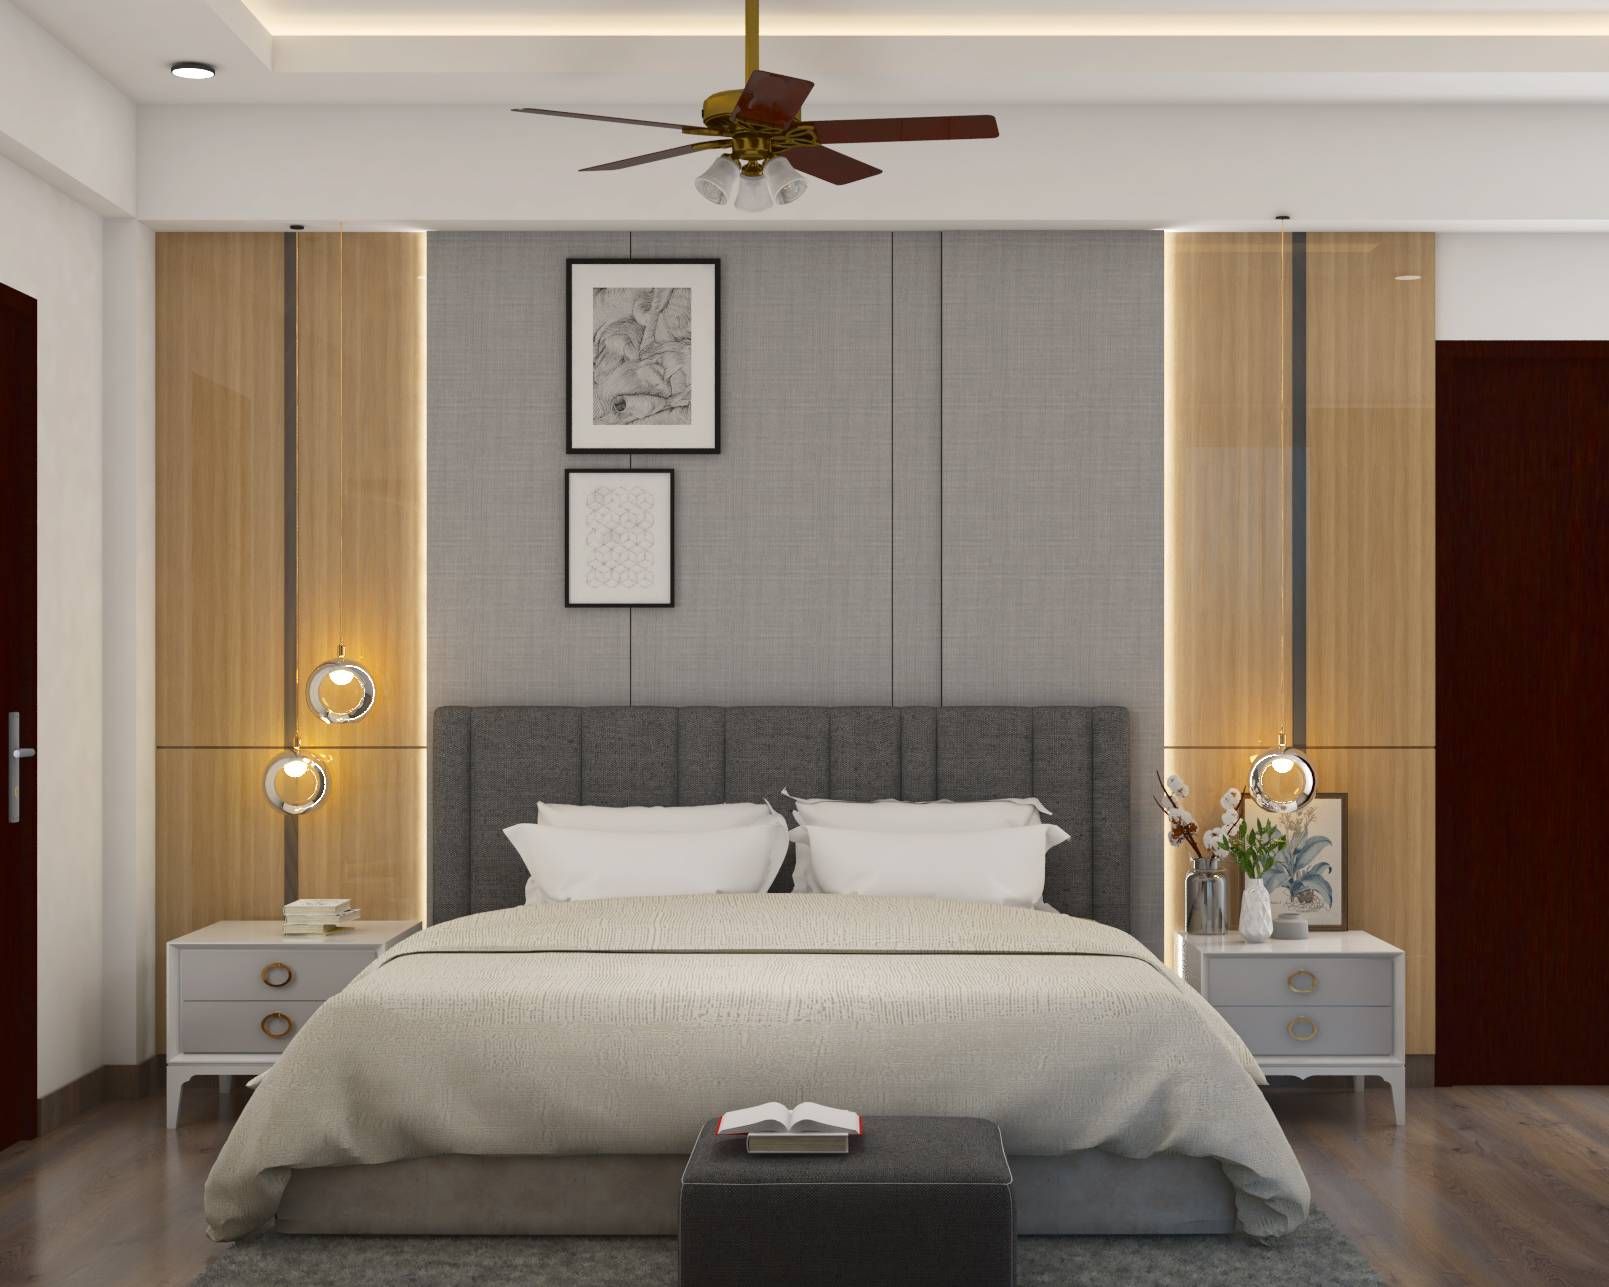 Modern Master Bedroom Design With Grey And Wooden Elements